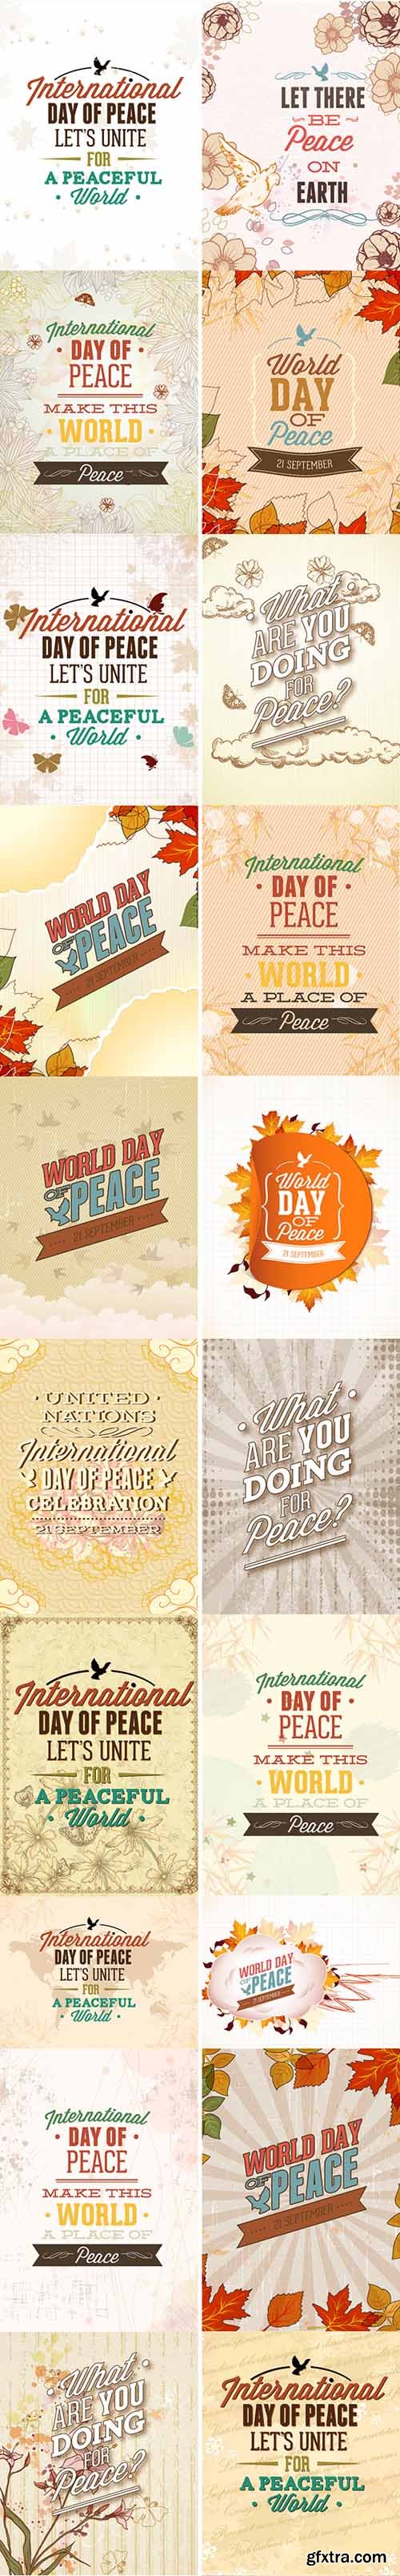 30 International Day of Peace Vector Collection